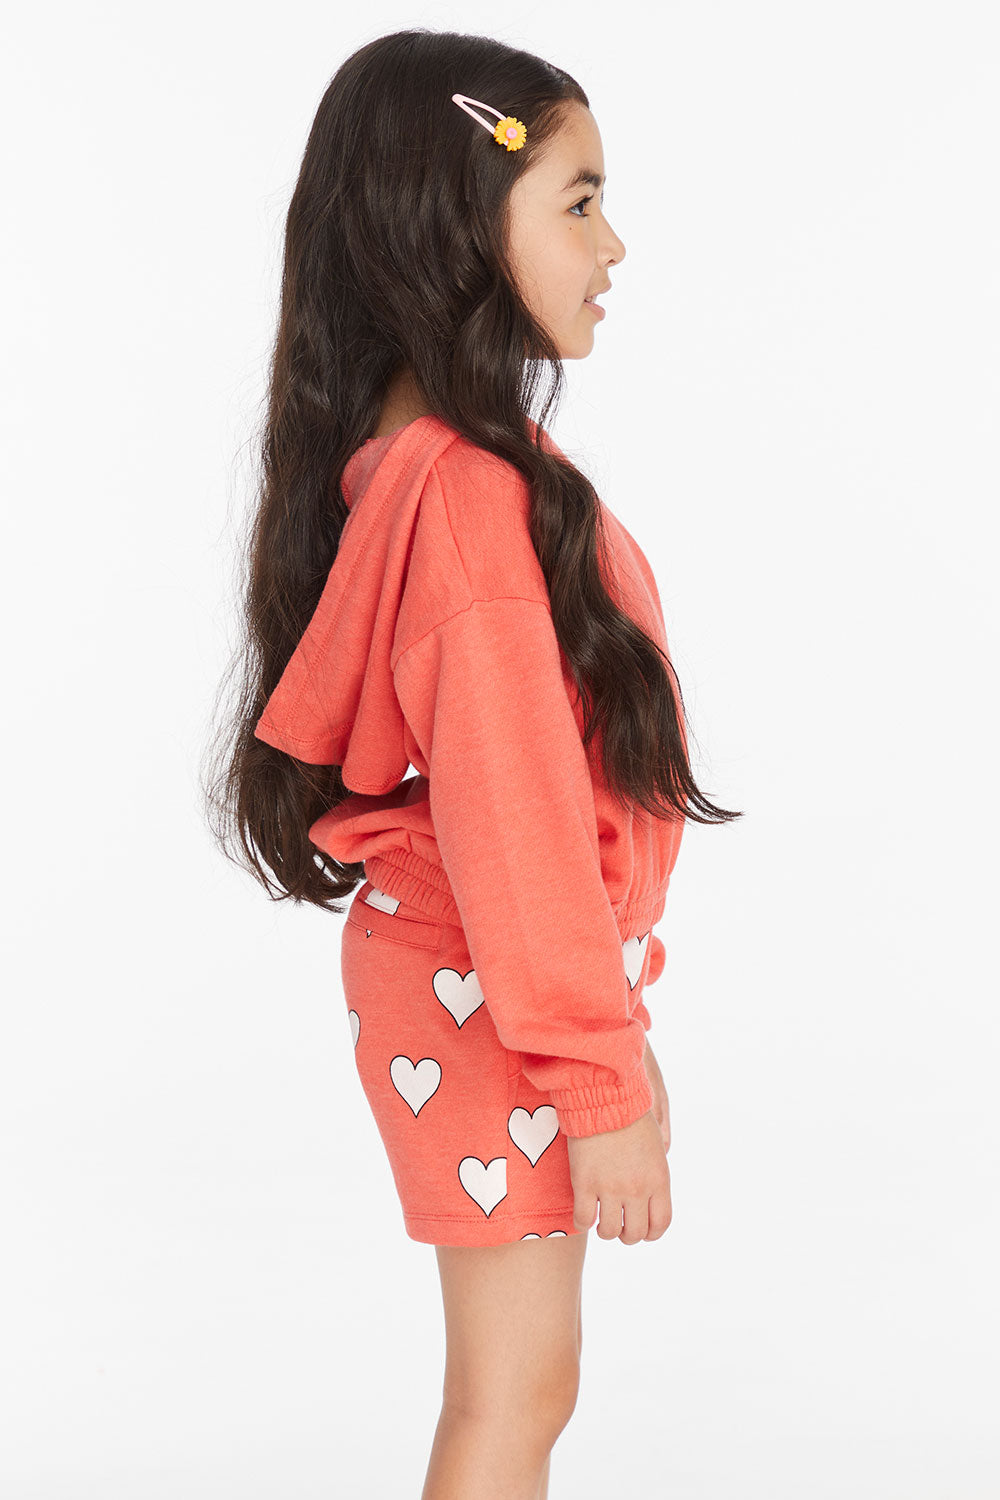 Smiley Flower &amp; Hearts Girls Pullover Hoodie Girls chaserbrand